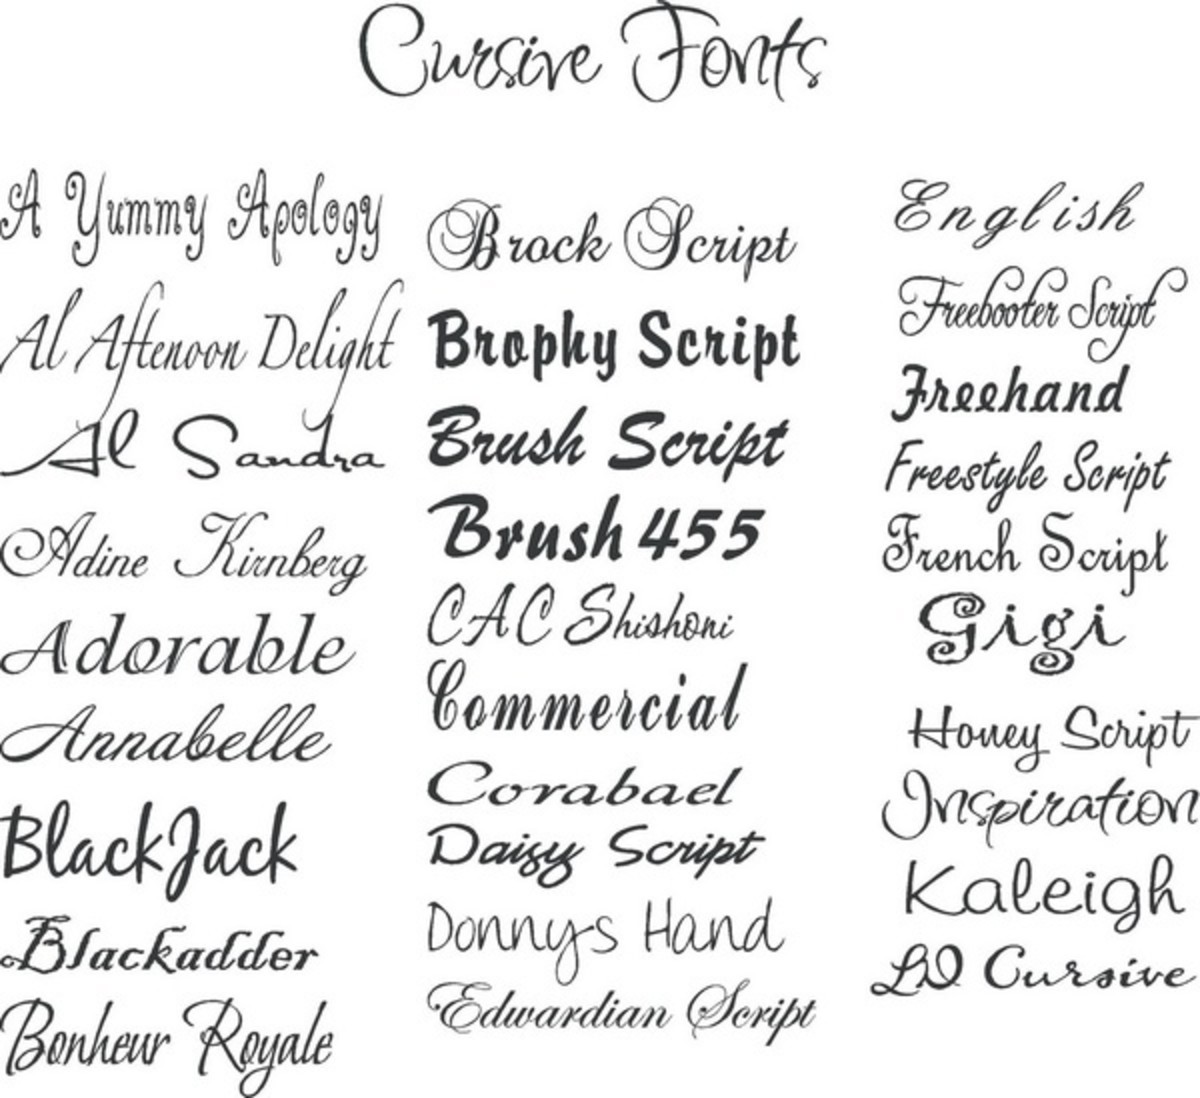 62 Free Download Tattoo Fonts Two Words In One Idea Tattoo Photos